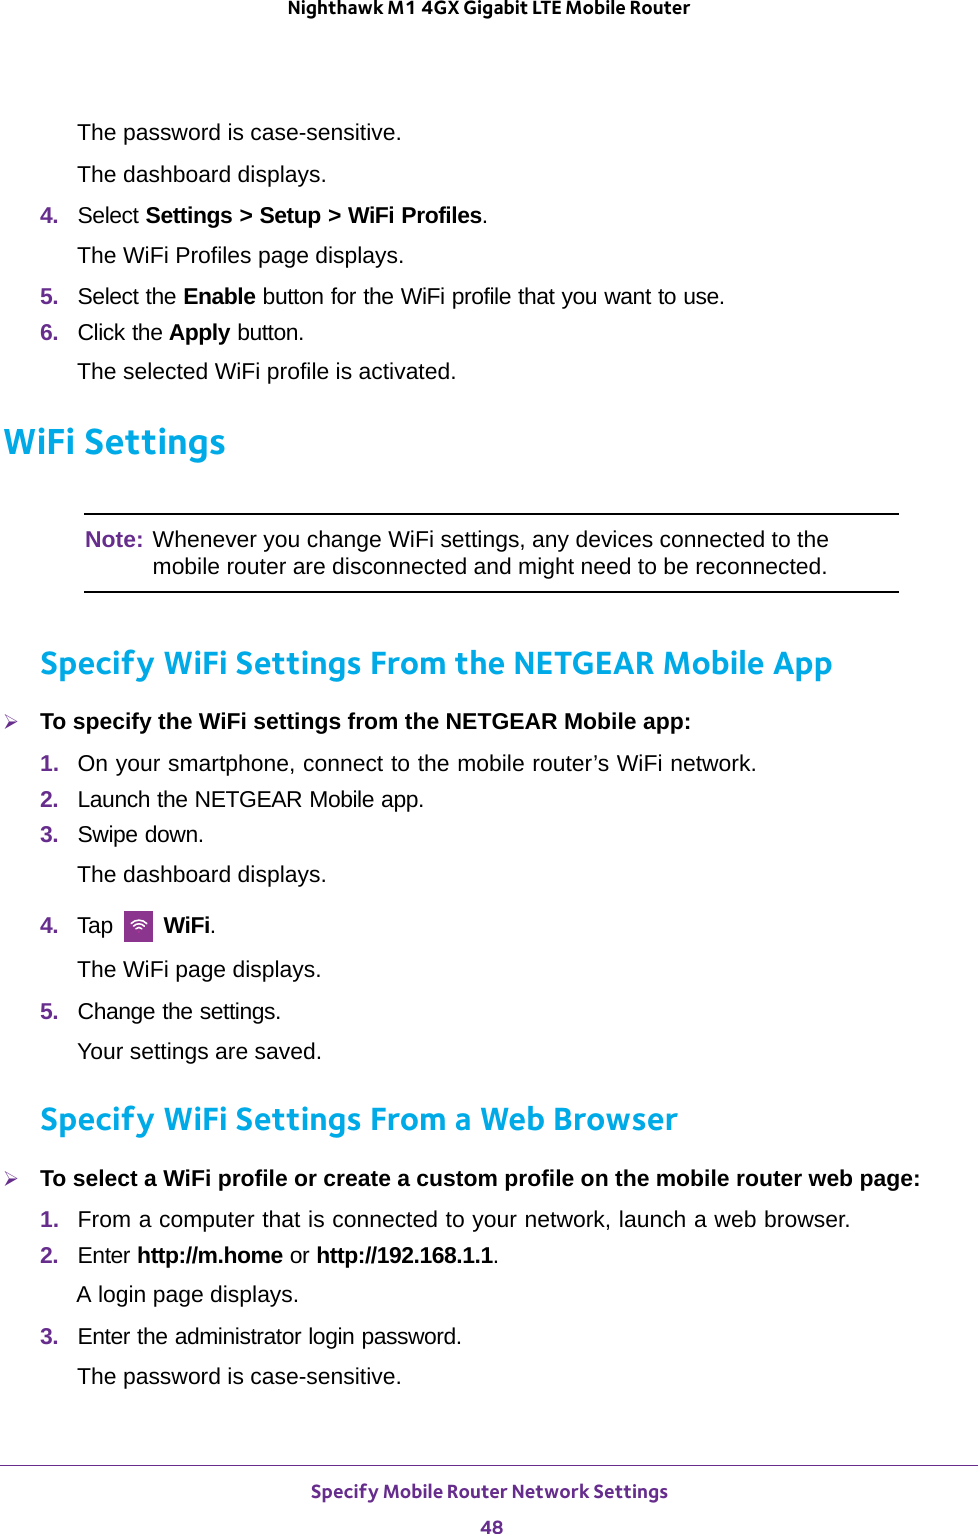 Specify Mobile Router Network Settings 48Nighthawk M1 4GX Gigabit LTE Mobile Router The password is case-sensitive.The dashboard displays.4.  Select Settings &gt; Setup &gt; WiFi Profiles.The WiFi Profiles page displays.5.  Select the Enable button for the WiFi profile that you want to use.6.  Click the Apply button.The selected WiFi profile is activated.WiFi SettingsNote: Whenever you change WiFi settings, any devices connected to the mobile router are disconnected and might need to be reconnected.Specify WiFi Settings From the NETGEAR Mobile AppTo specify the WiFi settings from the NETGEAR Mobile app:1.  On your smartphone, connect to the mobile router’s WiFi network.2.  Launch the NETGEAR Mobile app.3.  Swipe down.The dashboard displays.4.  Tap   WiFi.The WiFi page displays.5.  Change the settings.Your settings are saved.Specify WiFi Settings From a Web BrowserTo select a WiFi profile or create a custom profile on the mobile router web page:1.  From a computer that is connected to your network, launch a web browser.2.  Enter http://m.home or http://192.168.1.1.A login page displays.3.  Enter the administrator login password.The password is case-sensitive.